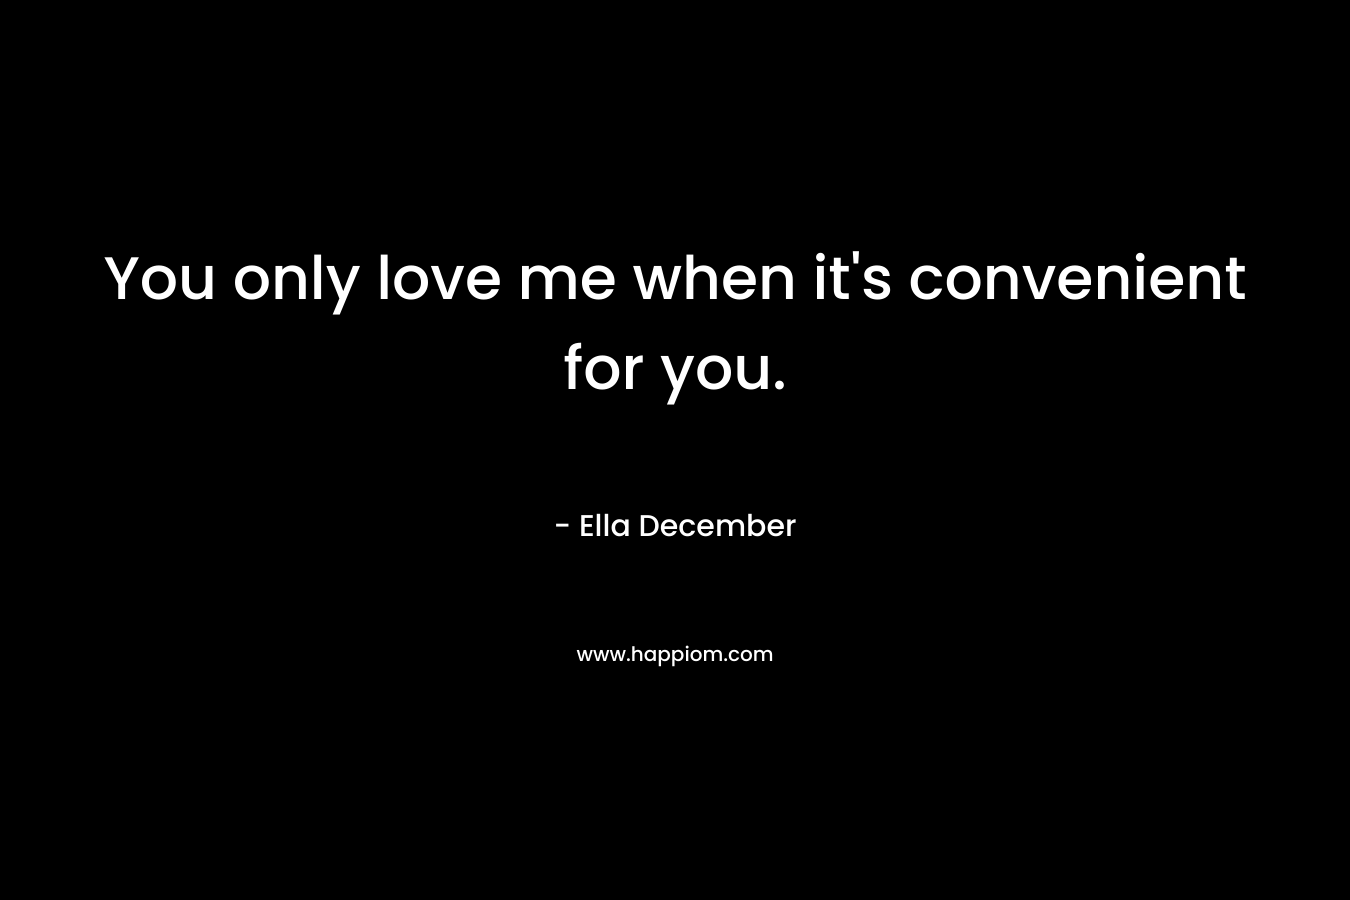 You only love me when it's convenient for you.